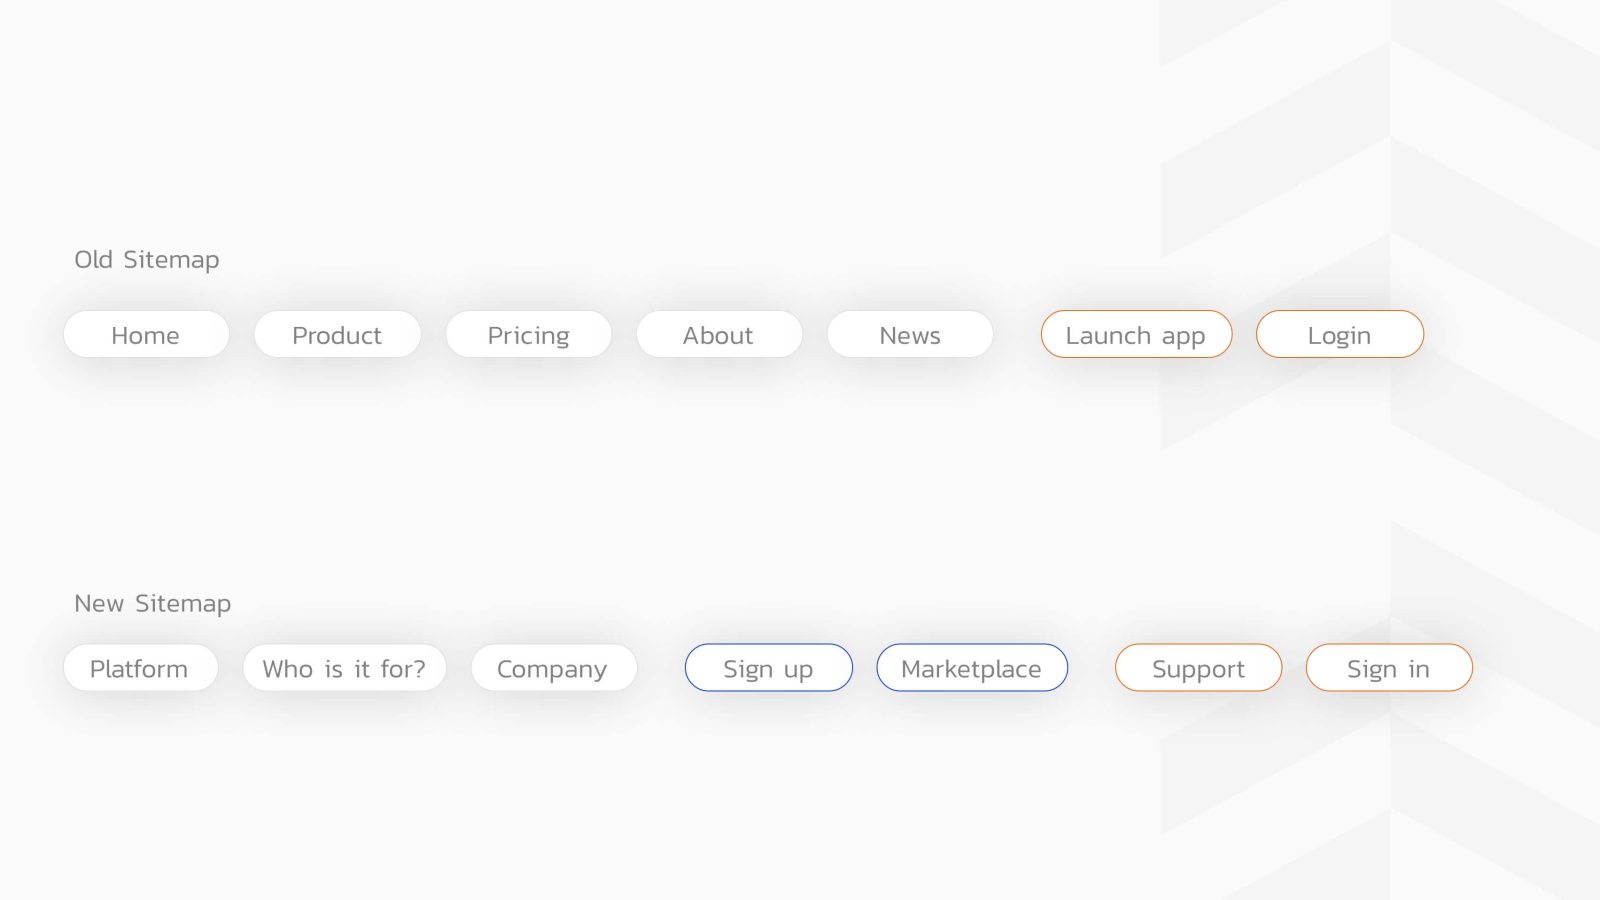 A graphical comparison of an old and new sitemap showcased through button-style links by a Design Agency Bristol. The old sitemap includes home, product, pricing, about, news, launch app, and